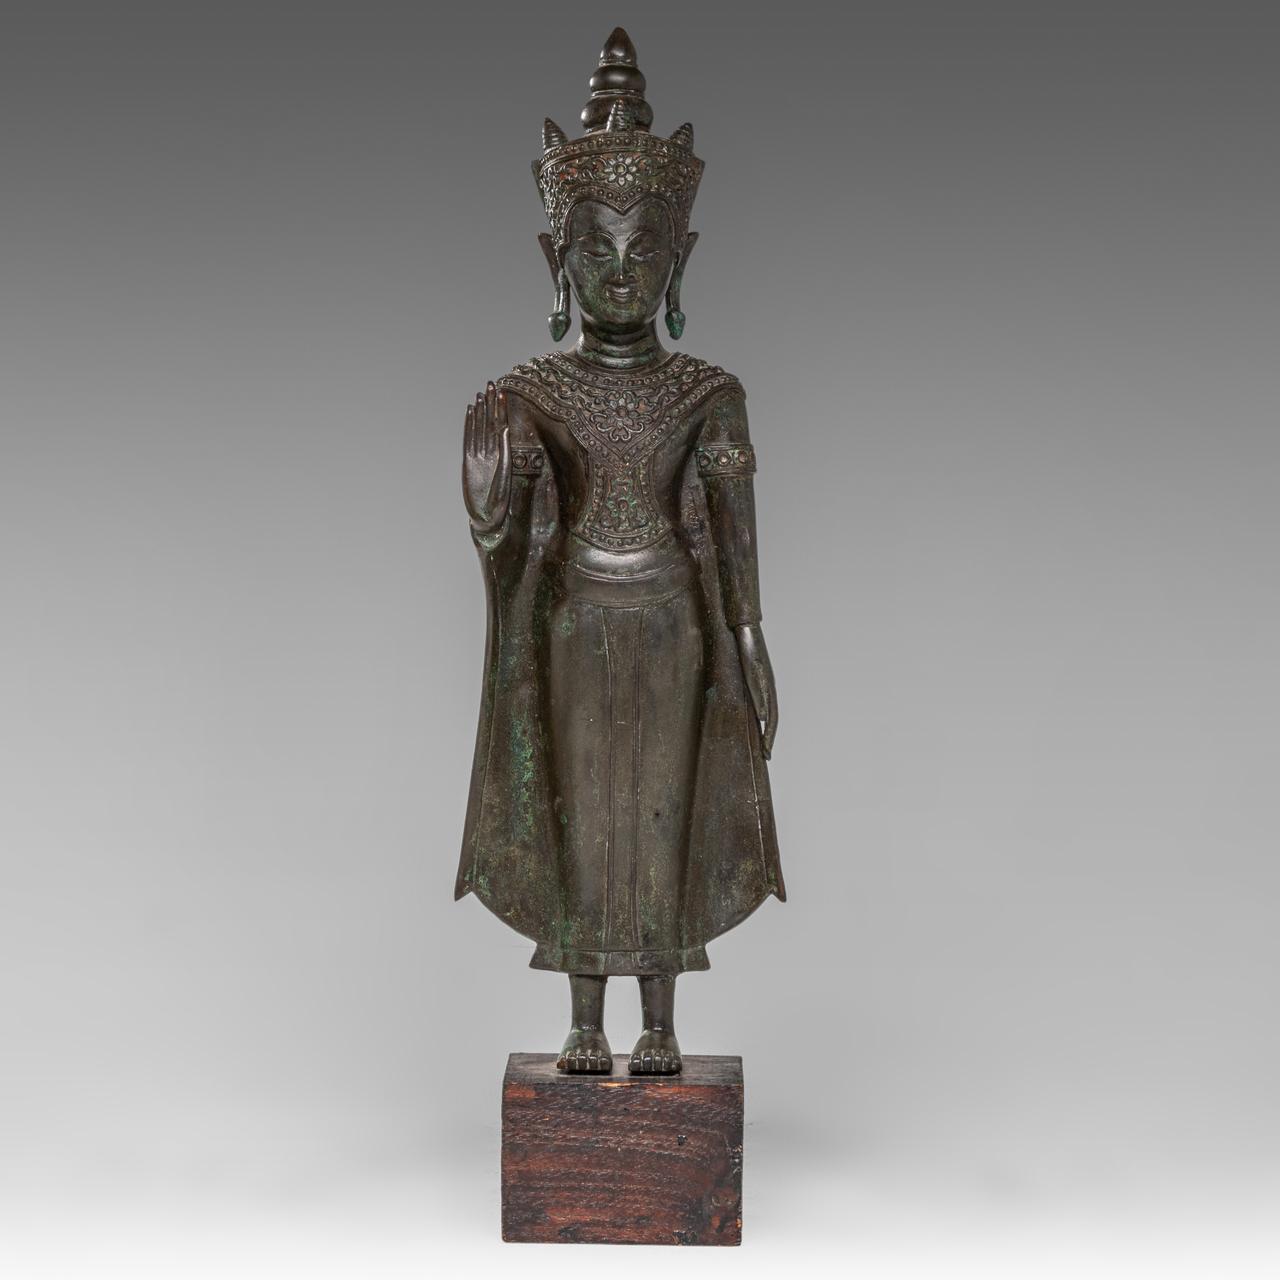 A Thai bronze figure of standing crowned Buddha, Ayutthaya style, 19thC, H 39,8 cm